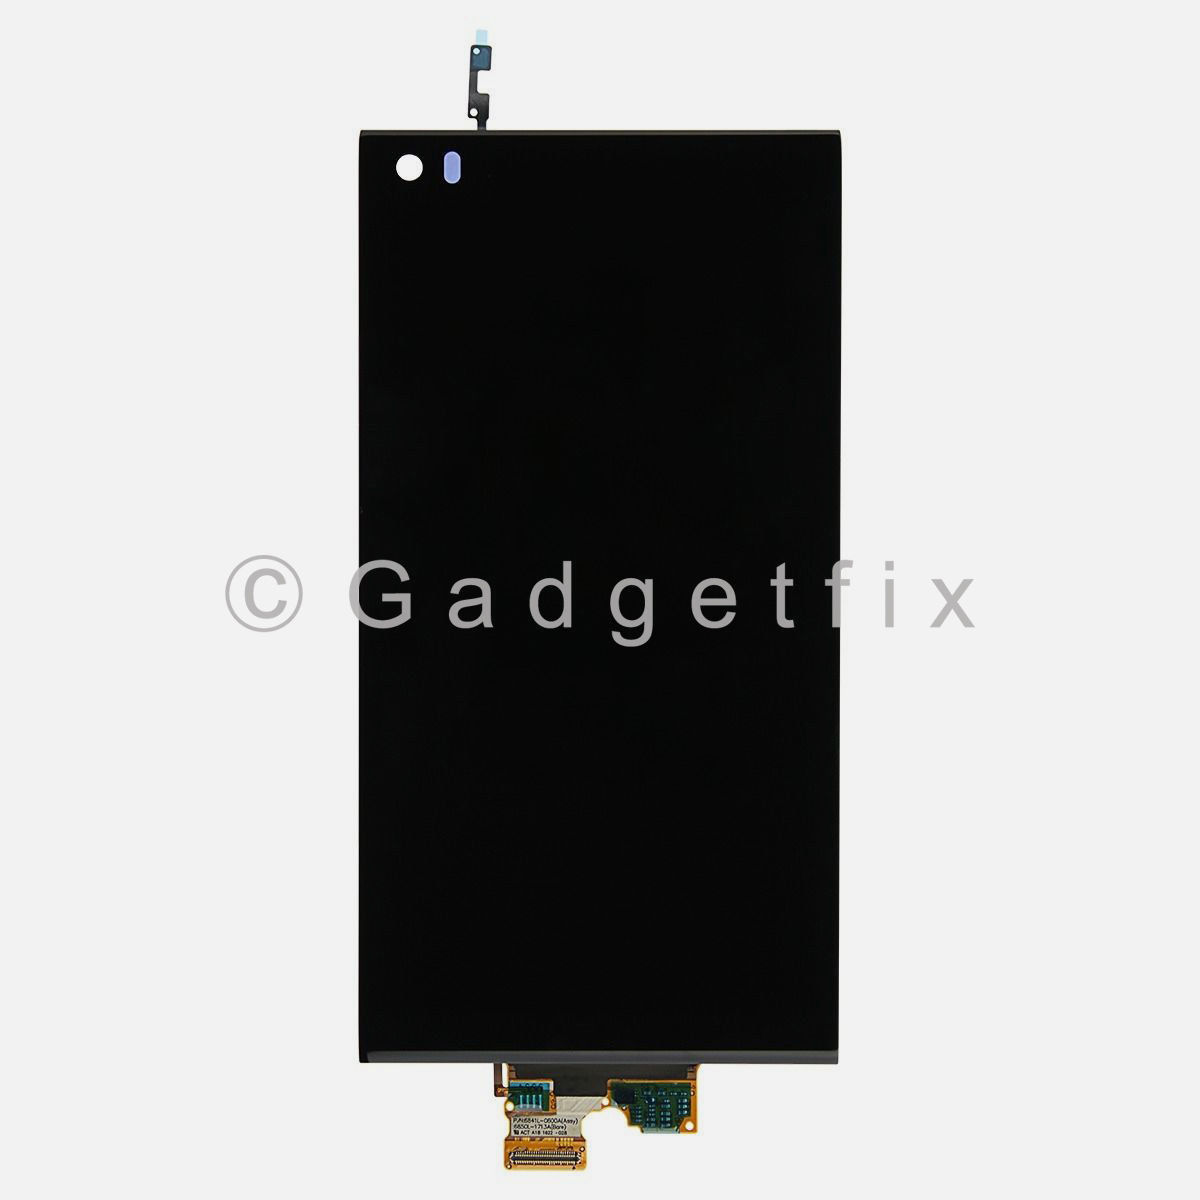 LCD Display Touch Screen Digitizer For LG V20 F800L H910 H915 H990 LS997 US996